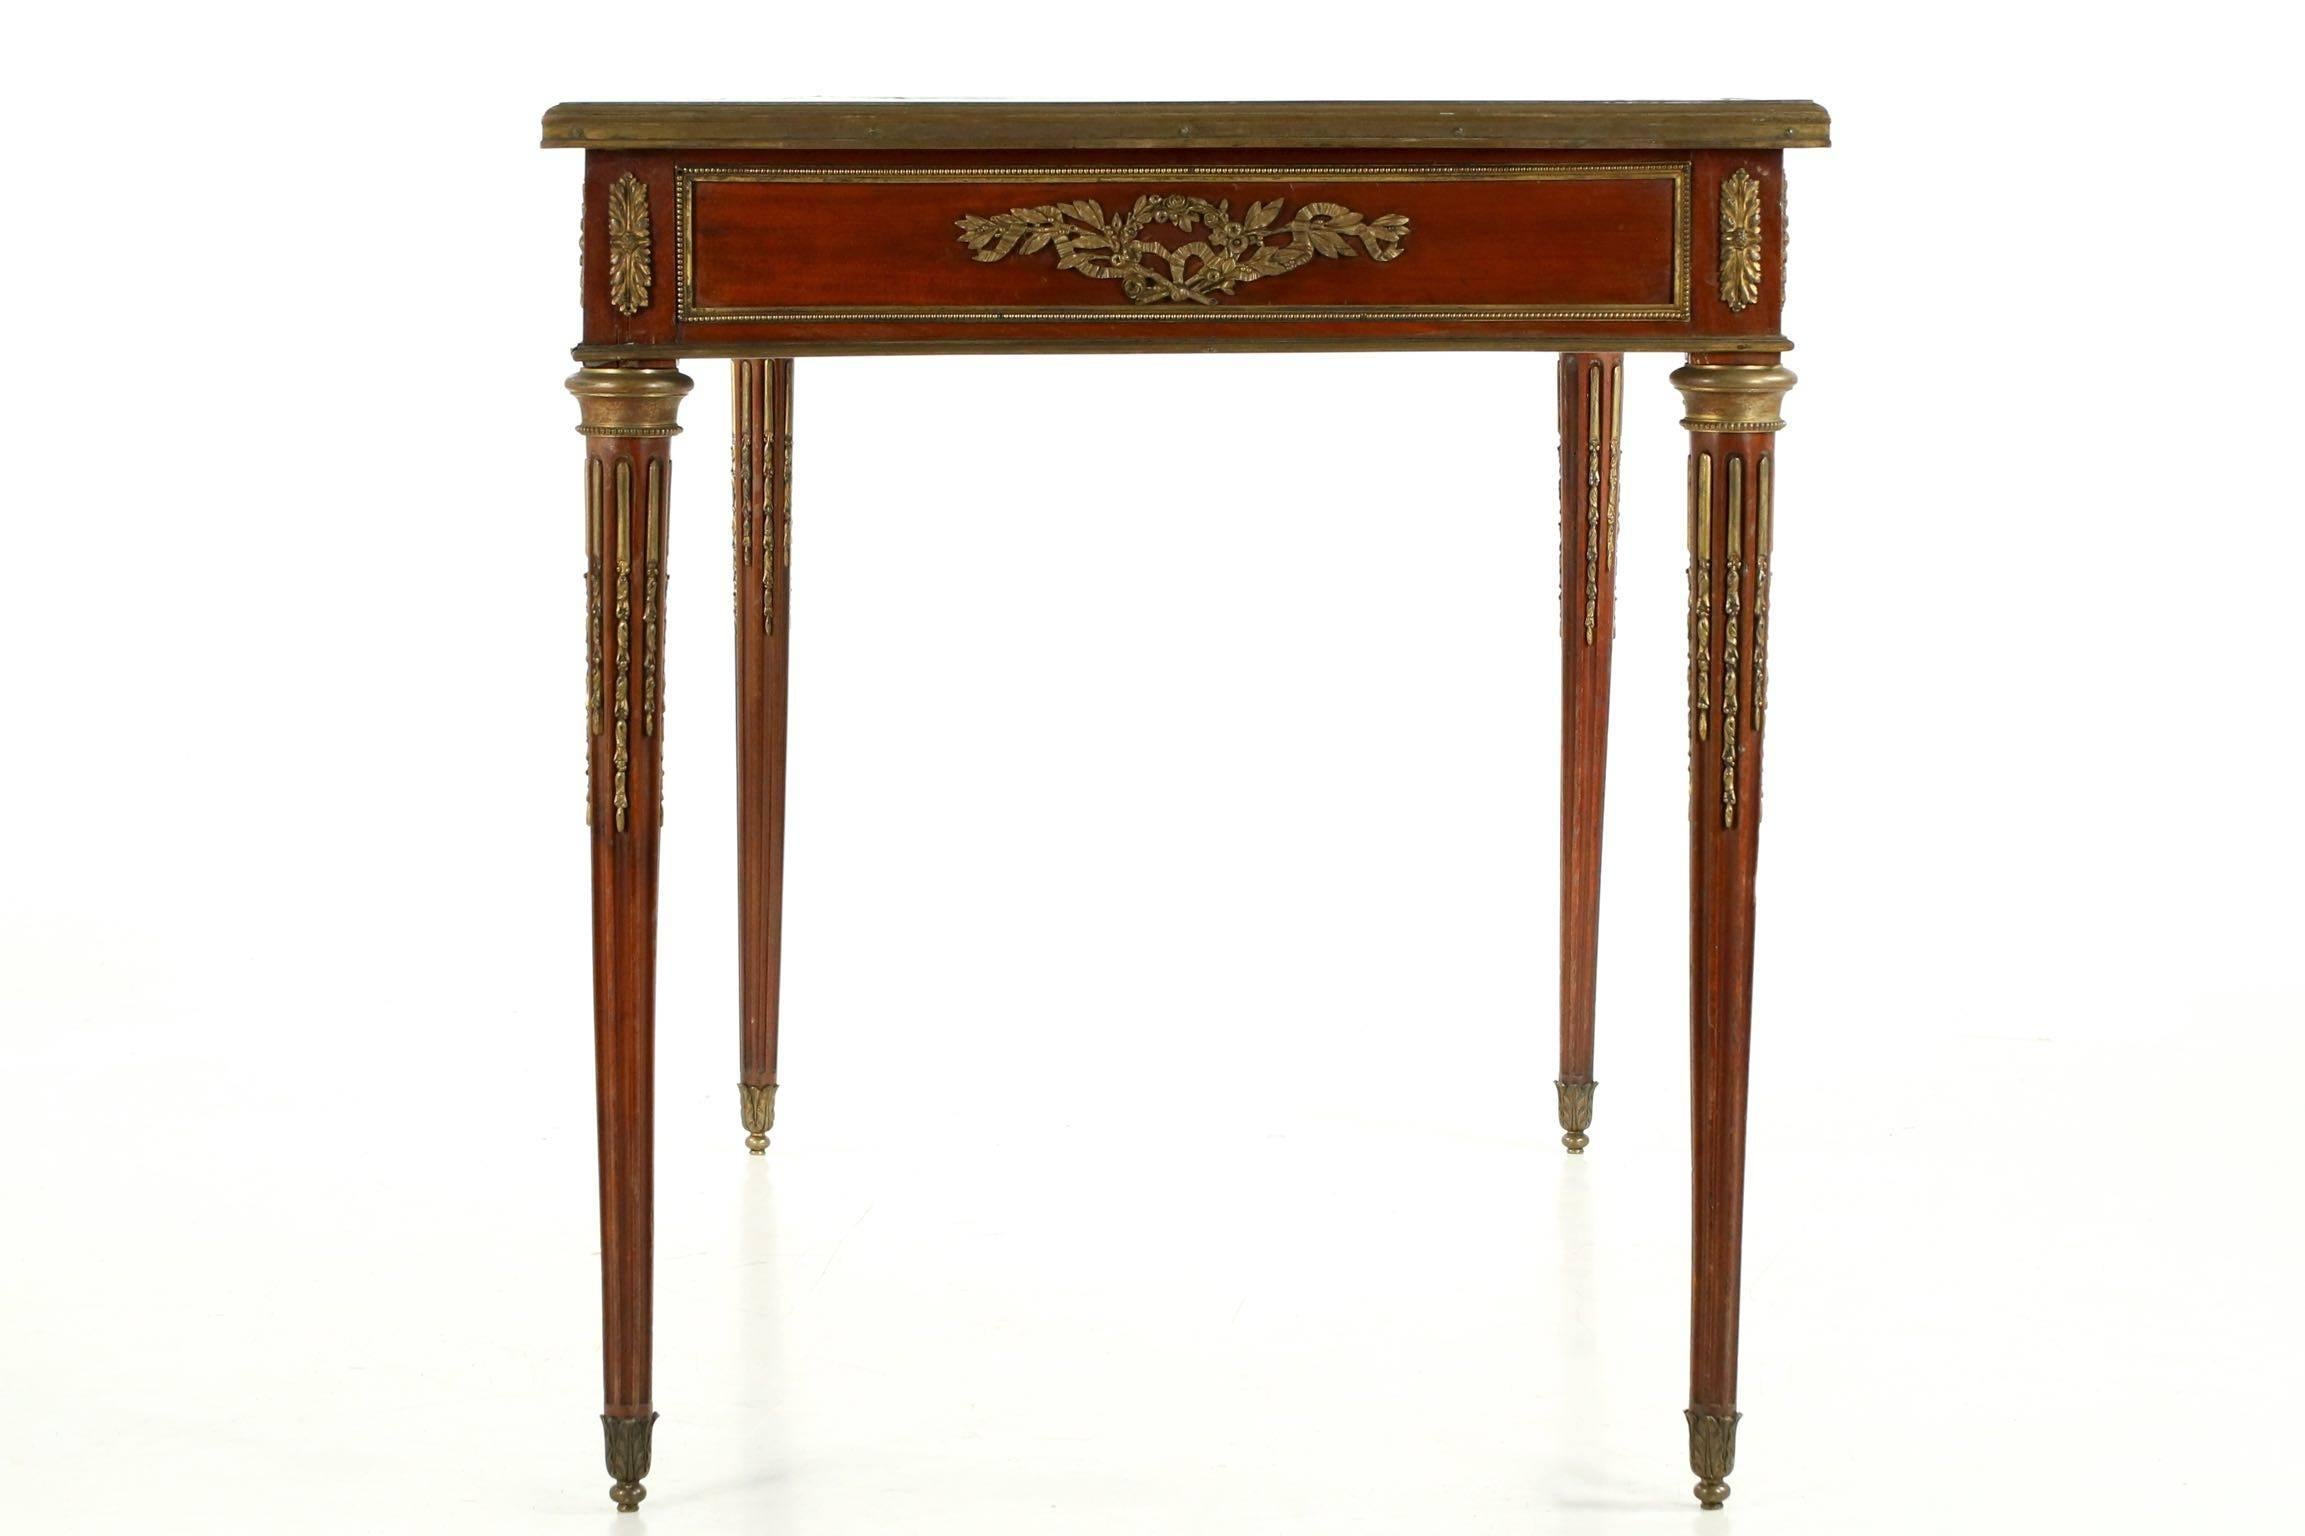 Gilt 19th Century French Louis XVI Style Mahogany Leather Top Antique Writing Desk